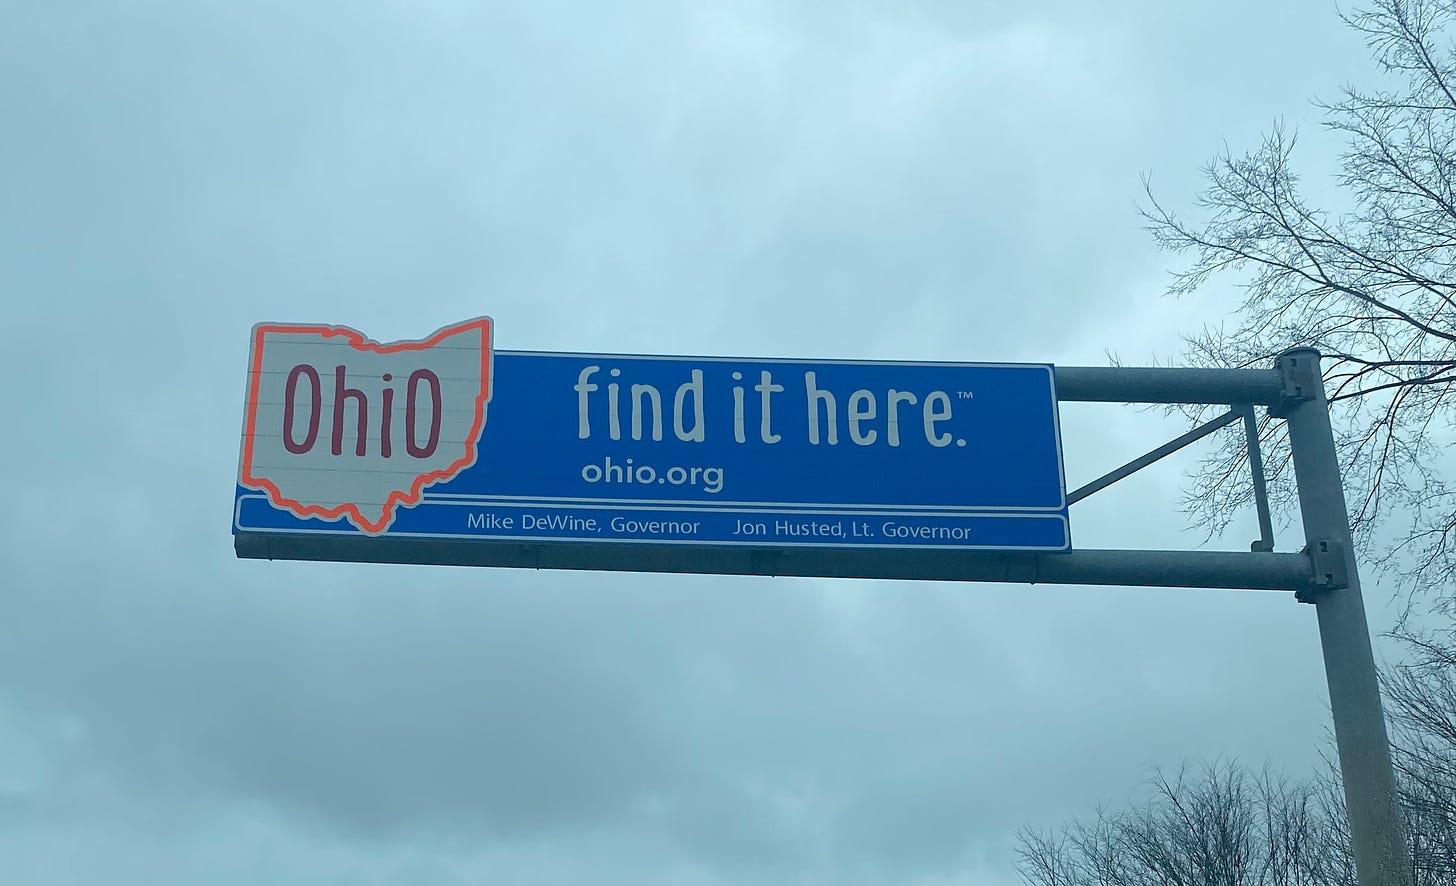 A sign for Ohio, proclaiming find it here